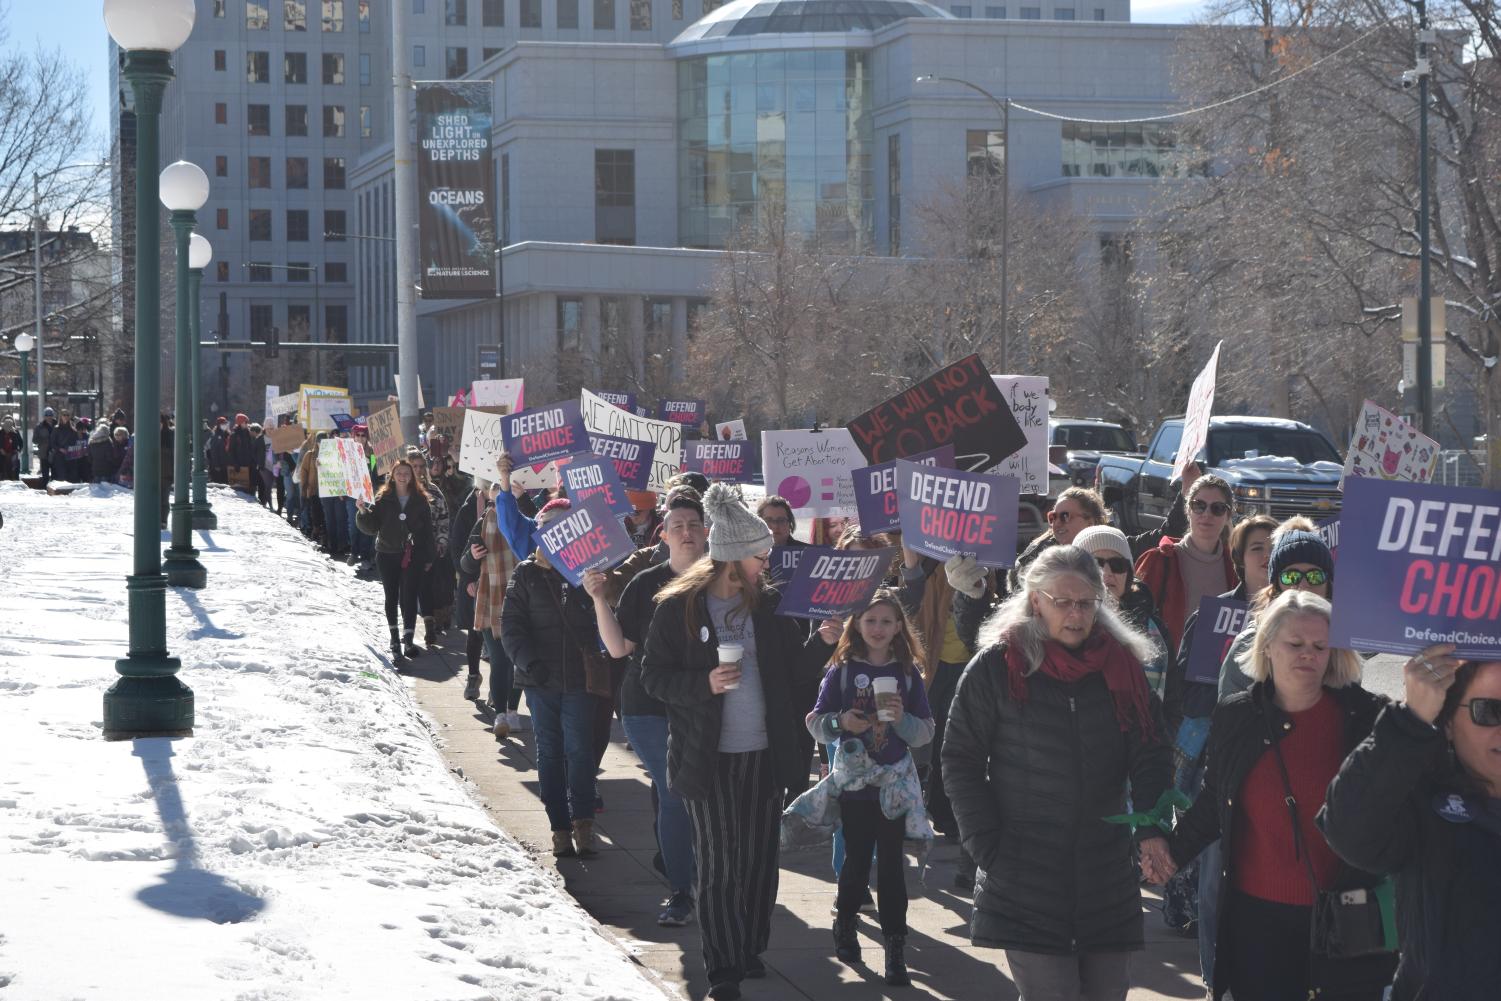 On+50th+Anniversary+of+Roe%2C+Denverites+March+for+Abortion+Justice%2C+Womens+Rights%3A+See+Moments+Here